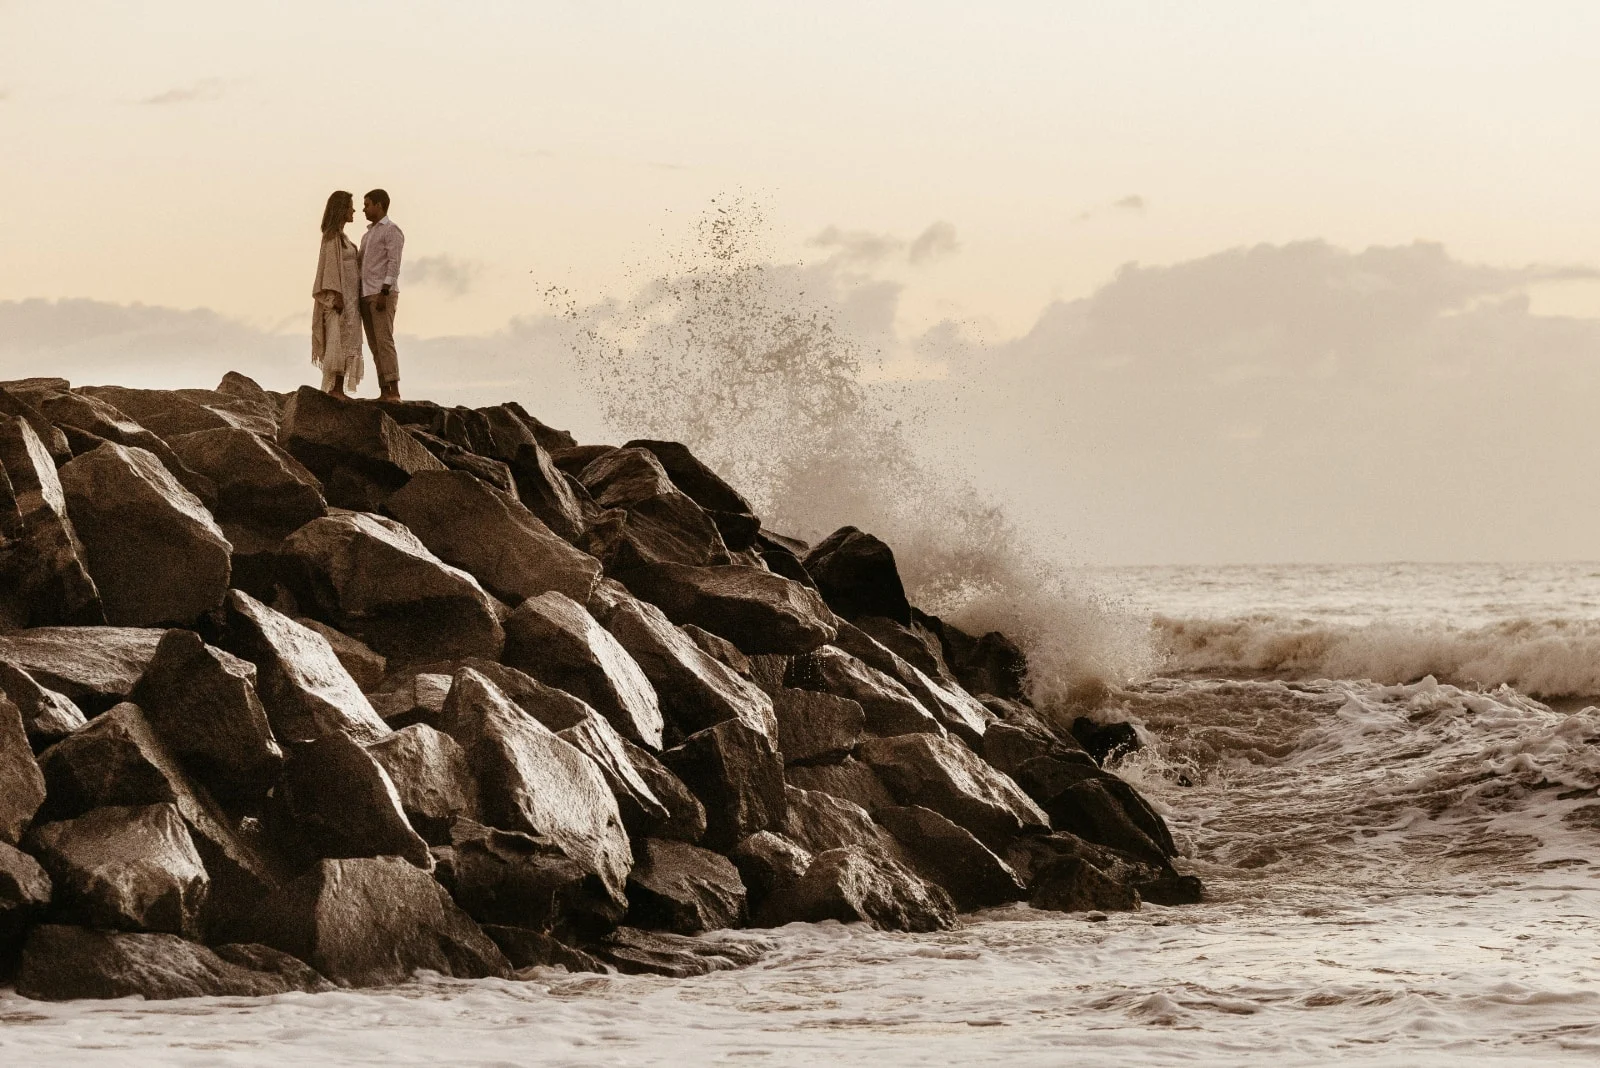 man and woman making eye contact while standing on rocks